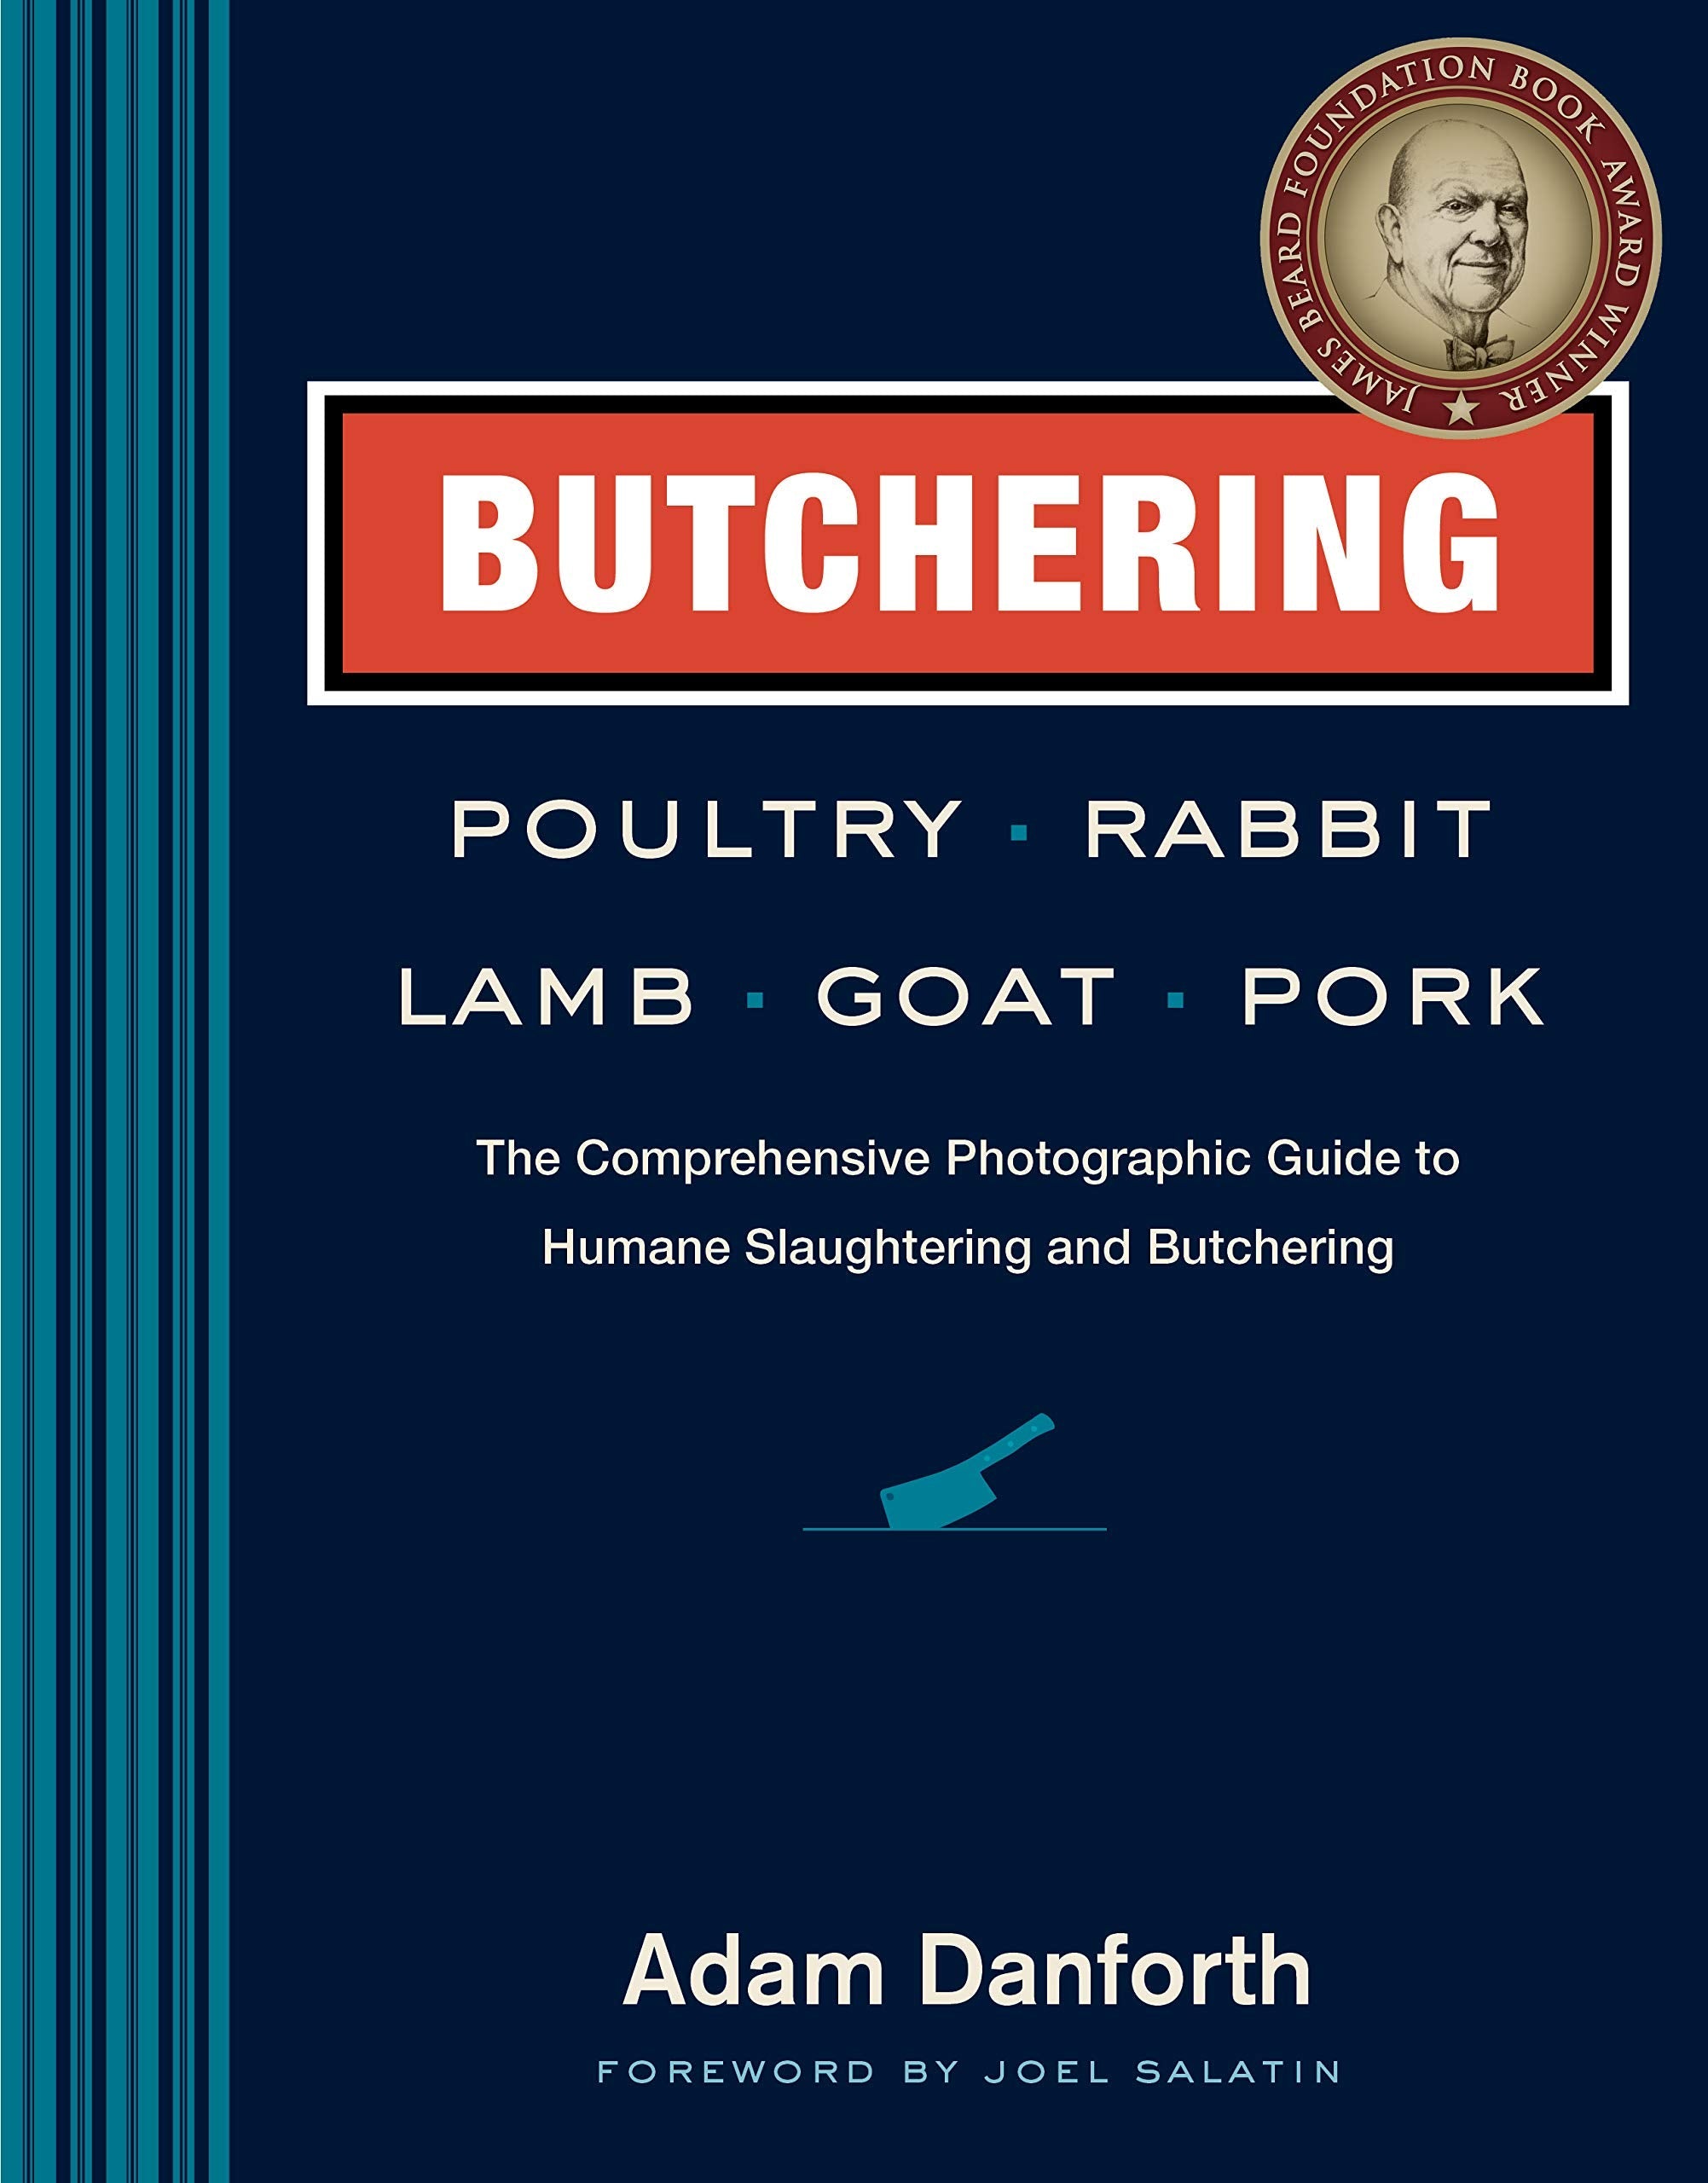 Butchering Poultry, Rabbit, Lamb, Goat, and Pork: The Comprehensive Photographic Guide to Humane Slaughtering and Butchering, Hardcover (Adam Danforth)